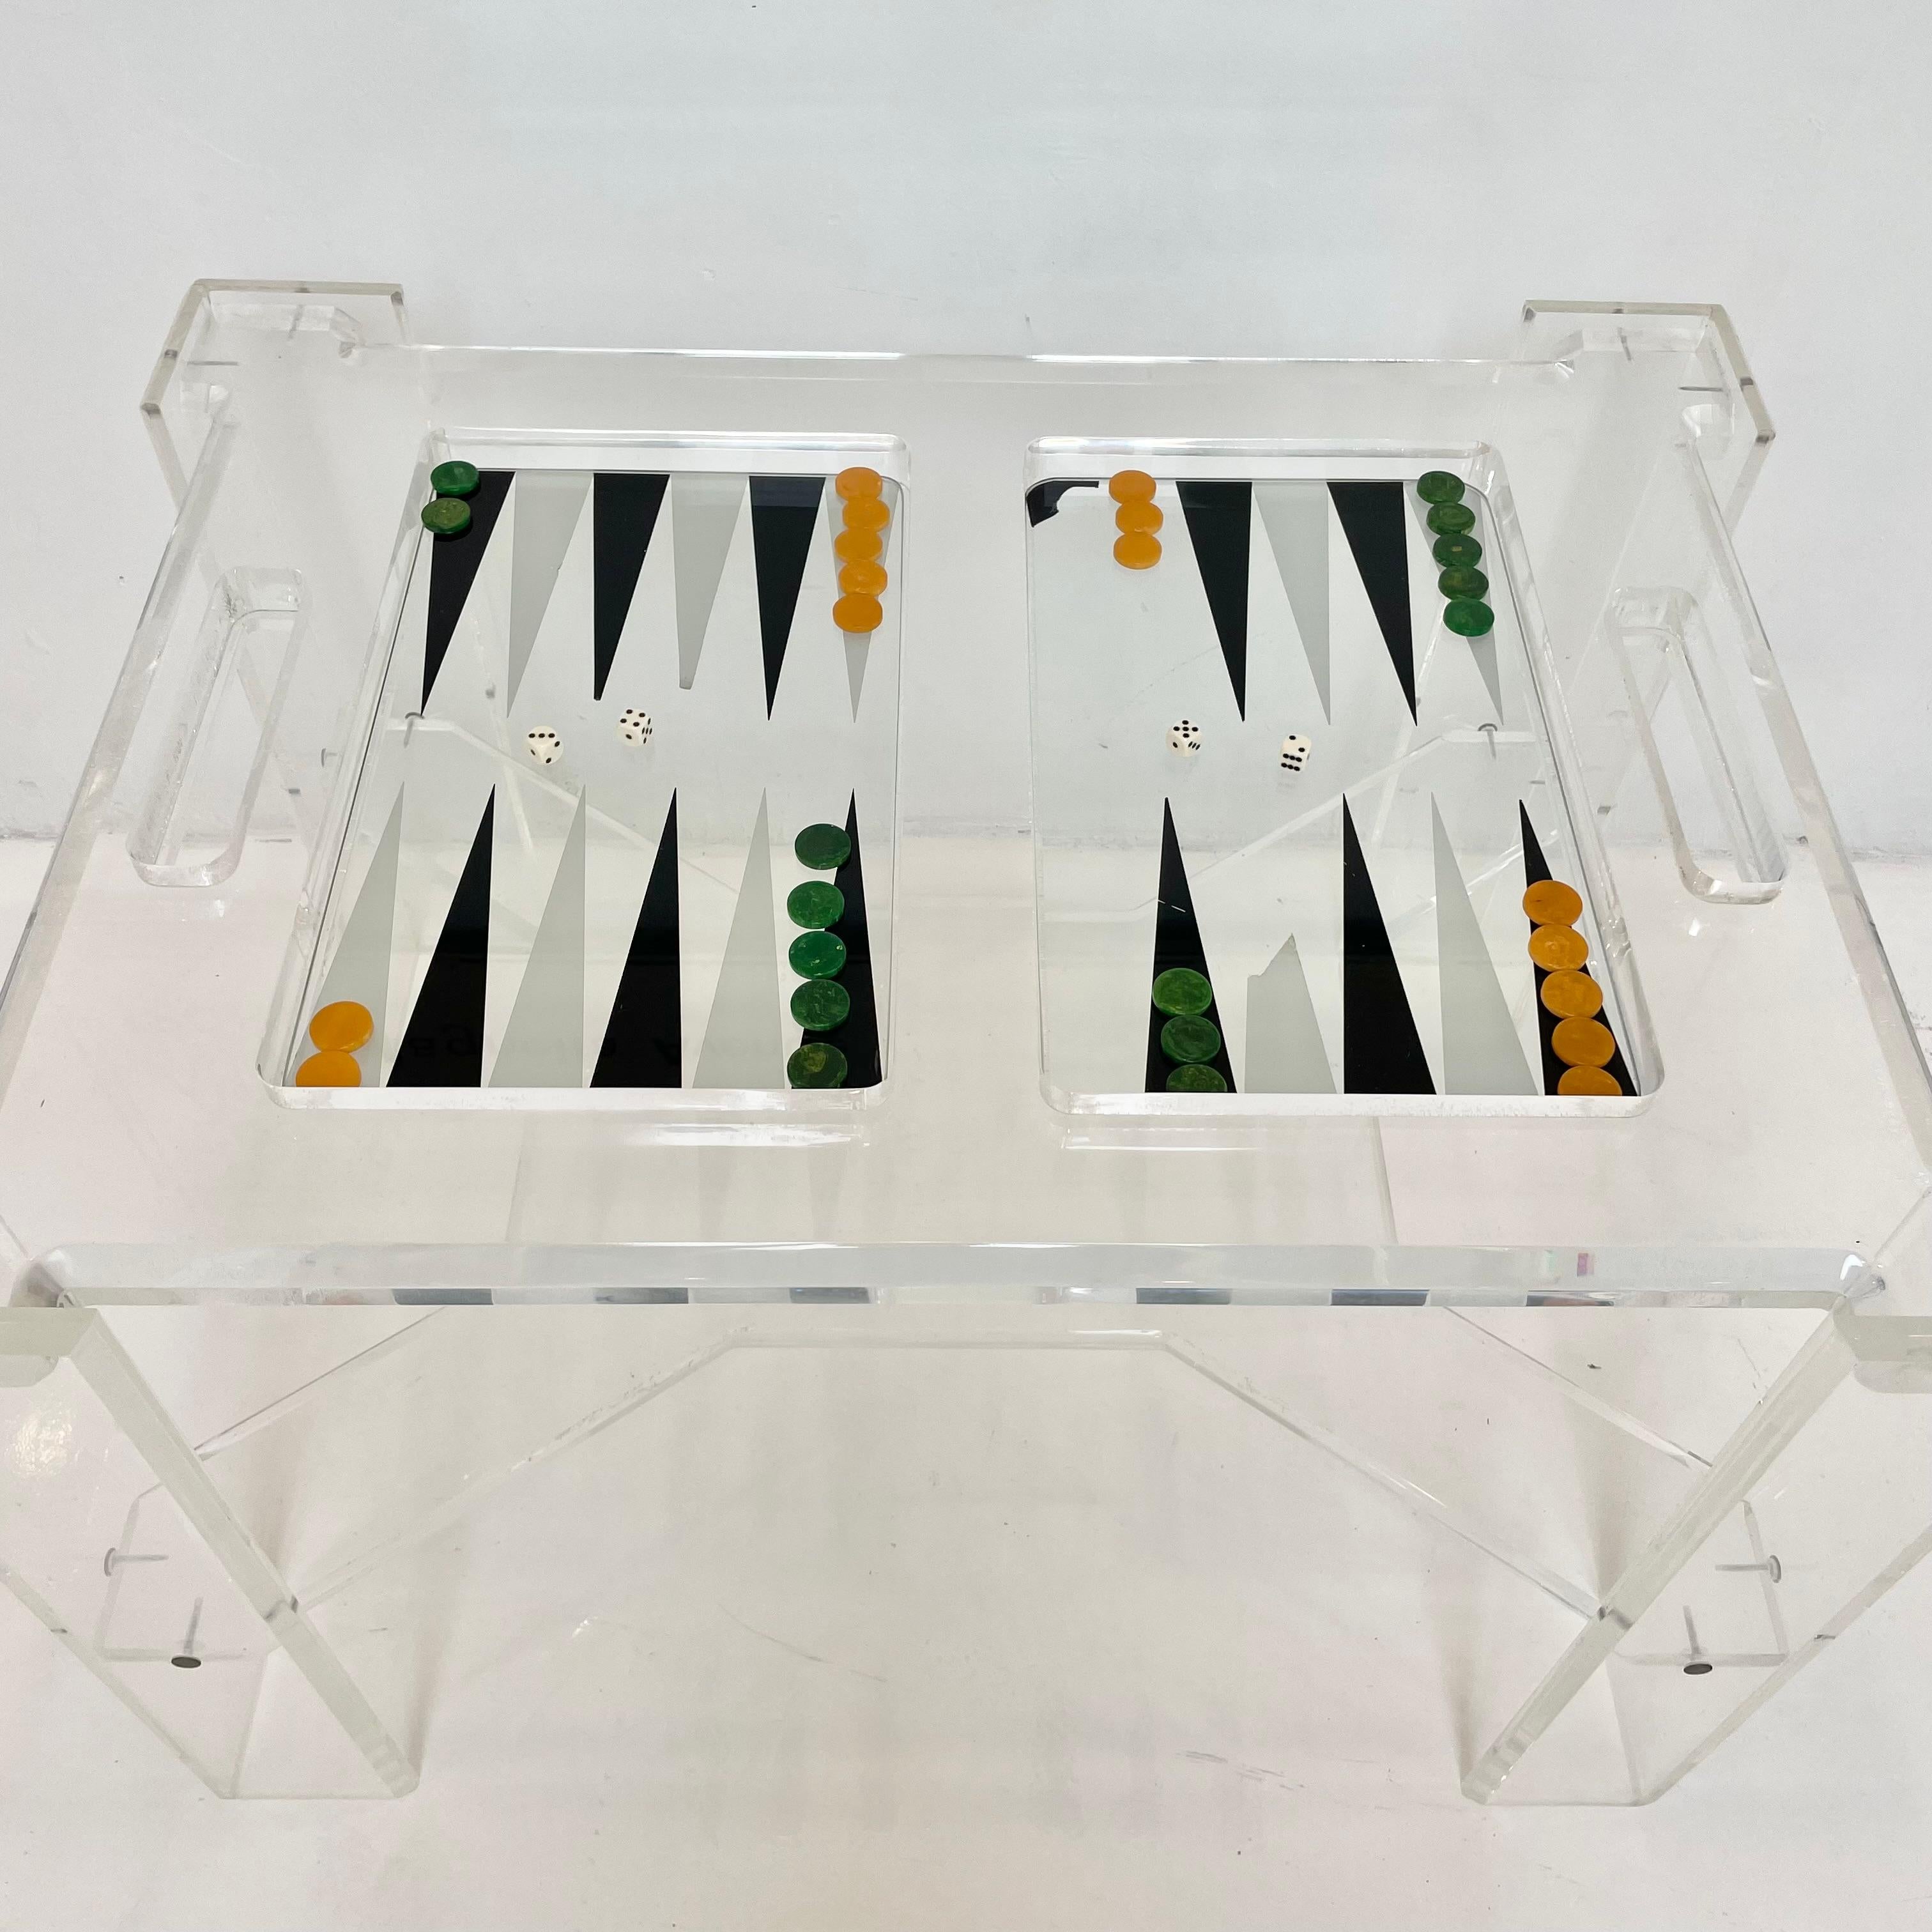 Faceted Lucite backgammon table with removable glass table top. Entire table is a thick clear Lucite giving this piece a great open feel and minimal look. Lucite is in good condition with some scratches and wear as shown. Extremely heavy. Unusual